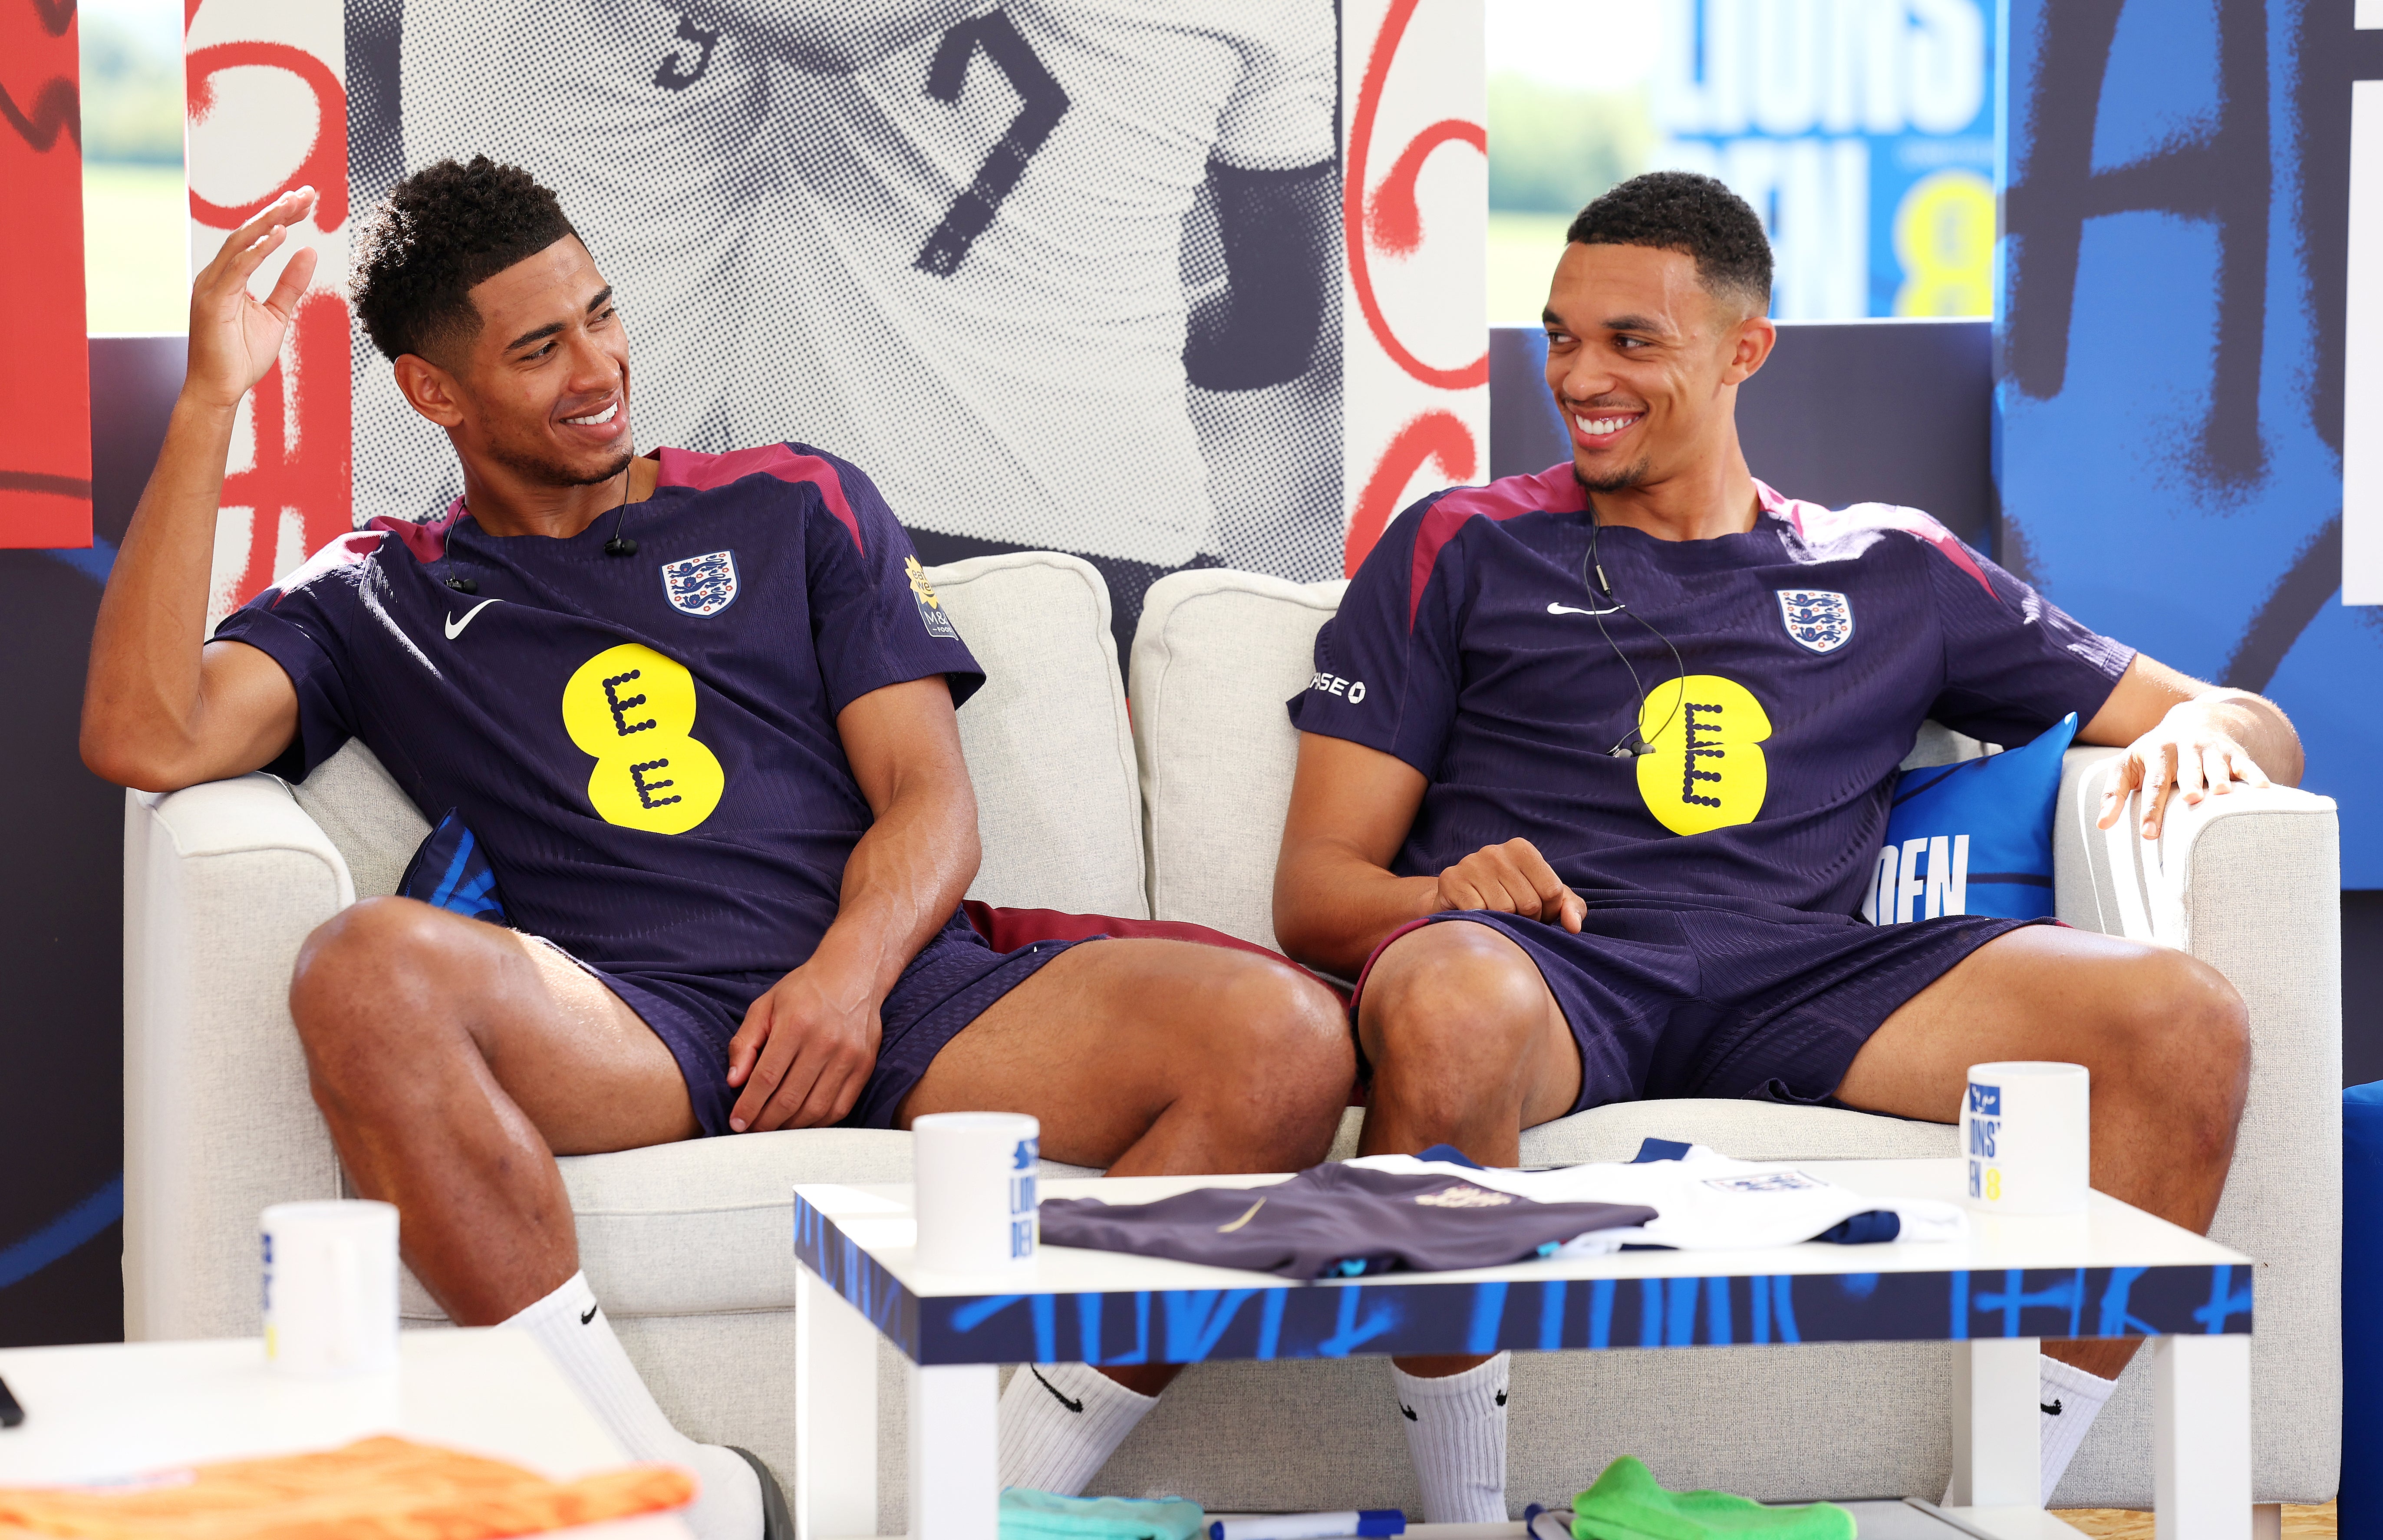 Alexander-Arnold and Bellingham relax at England’s training base